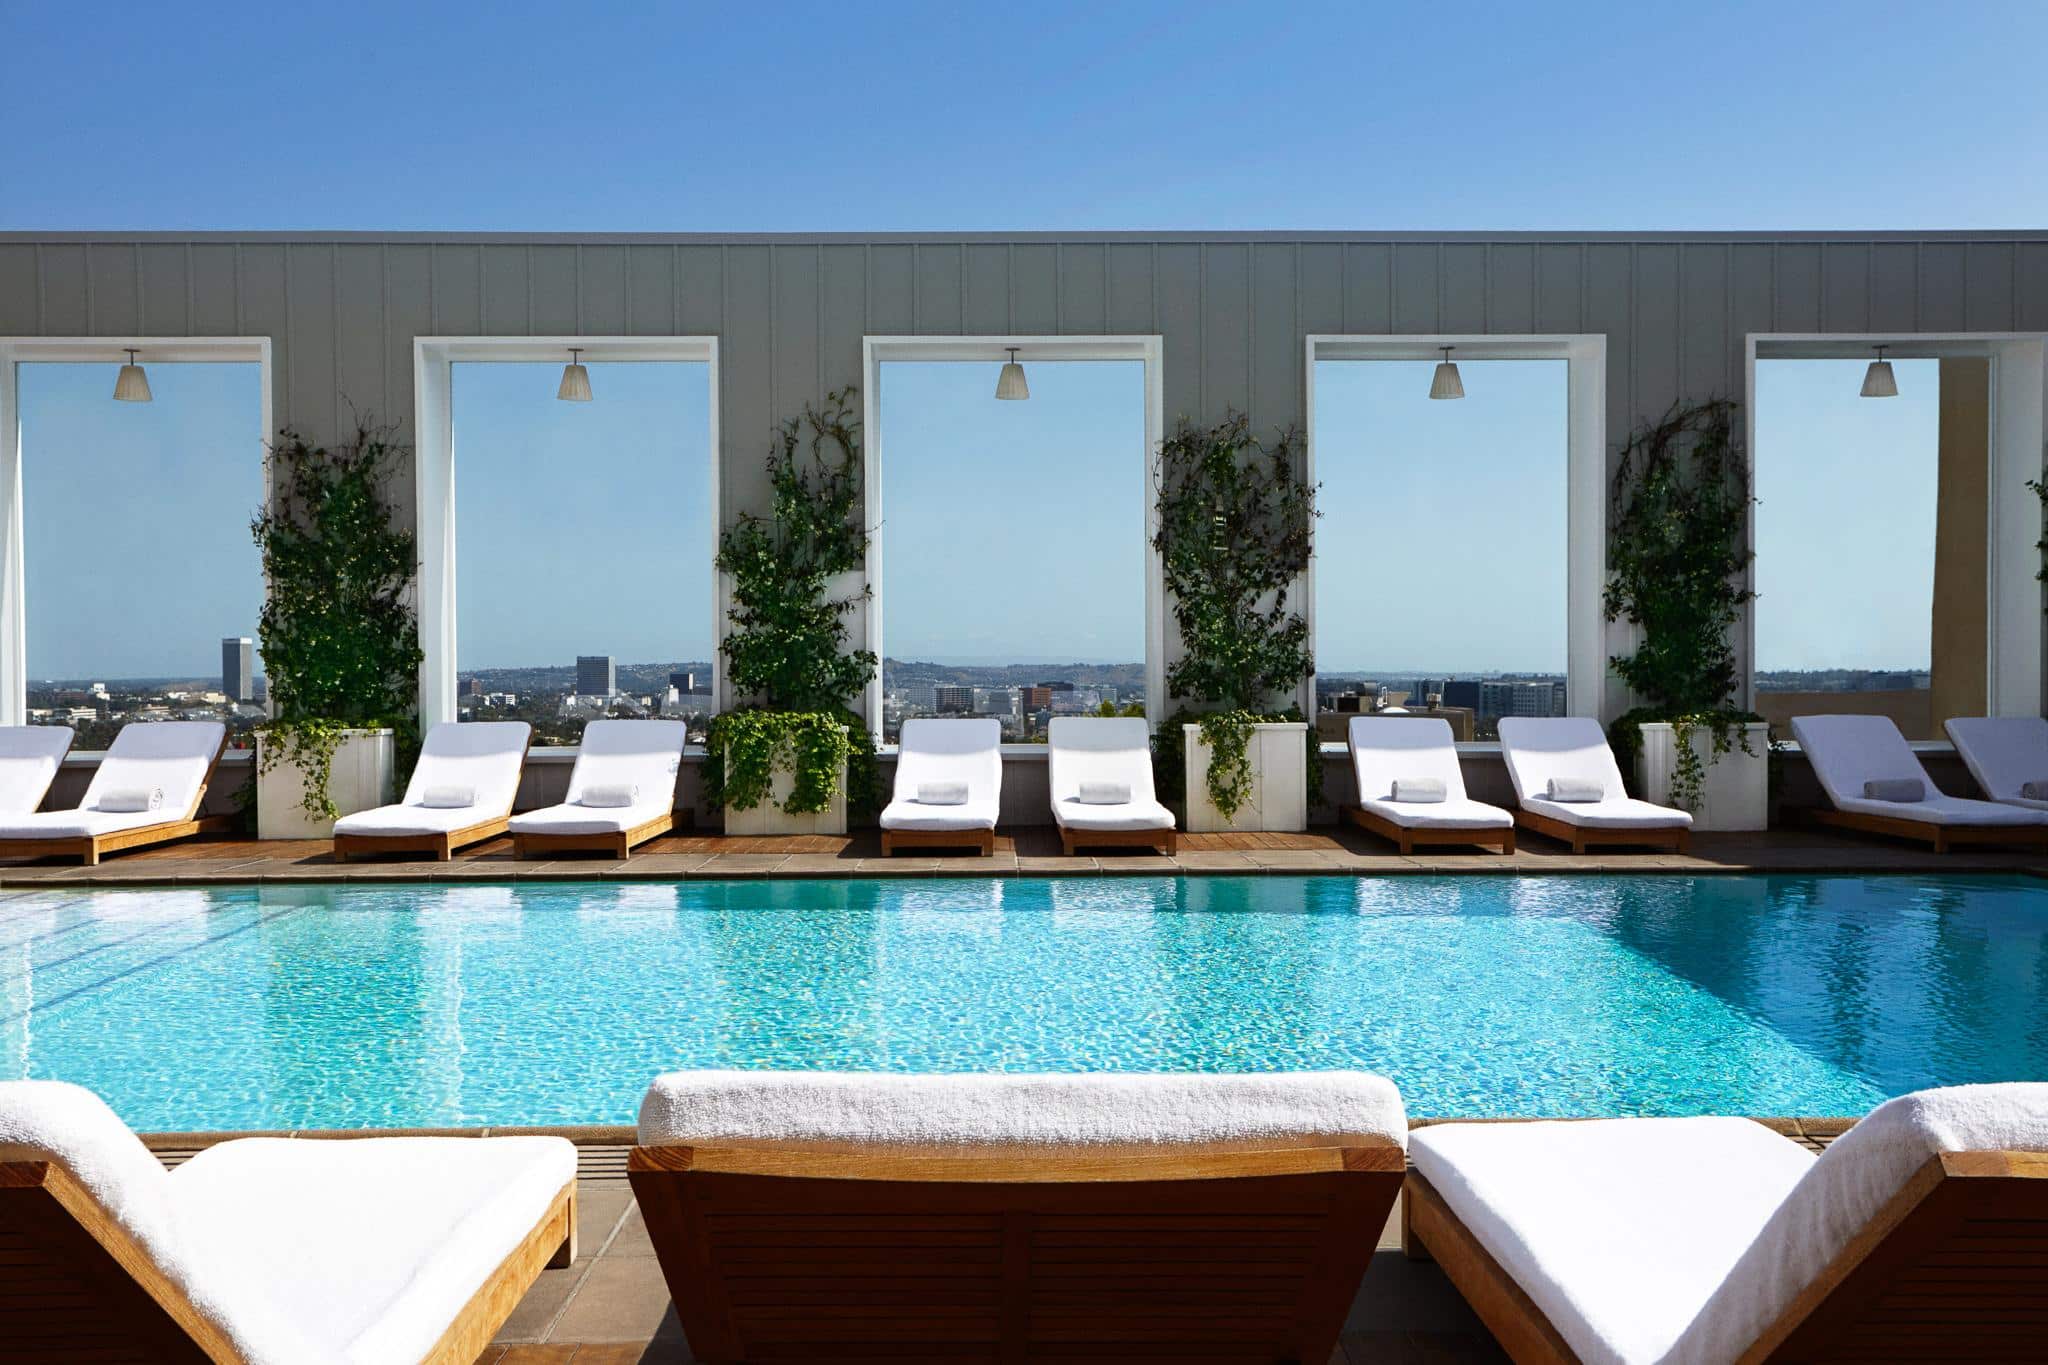 A shot of the pristine pool at The Mondrian Hotel in Los Angeles.